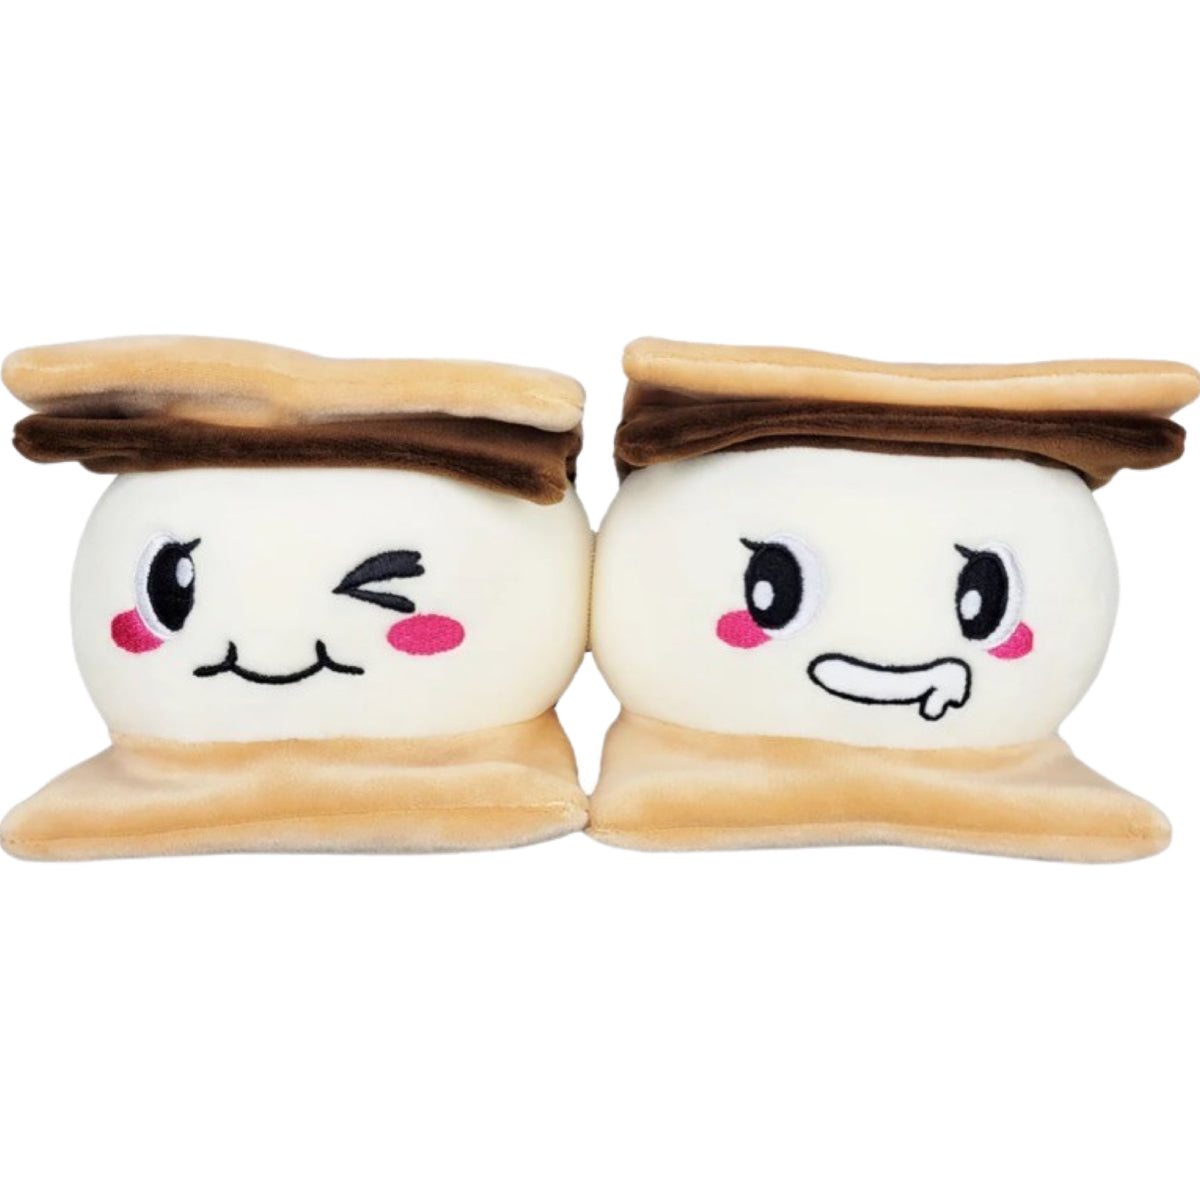 2pc Bewaltz 6" S'mores BFF Plush Set - Plushies Velcro Together